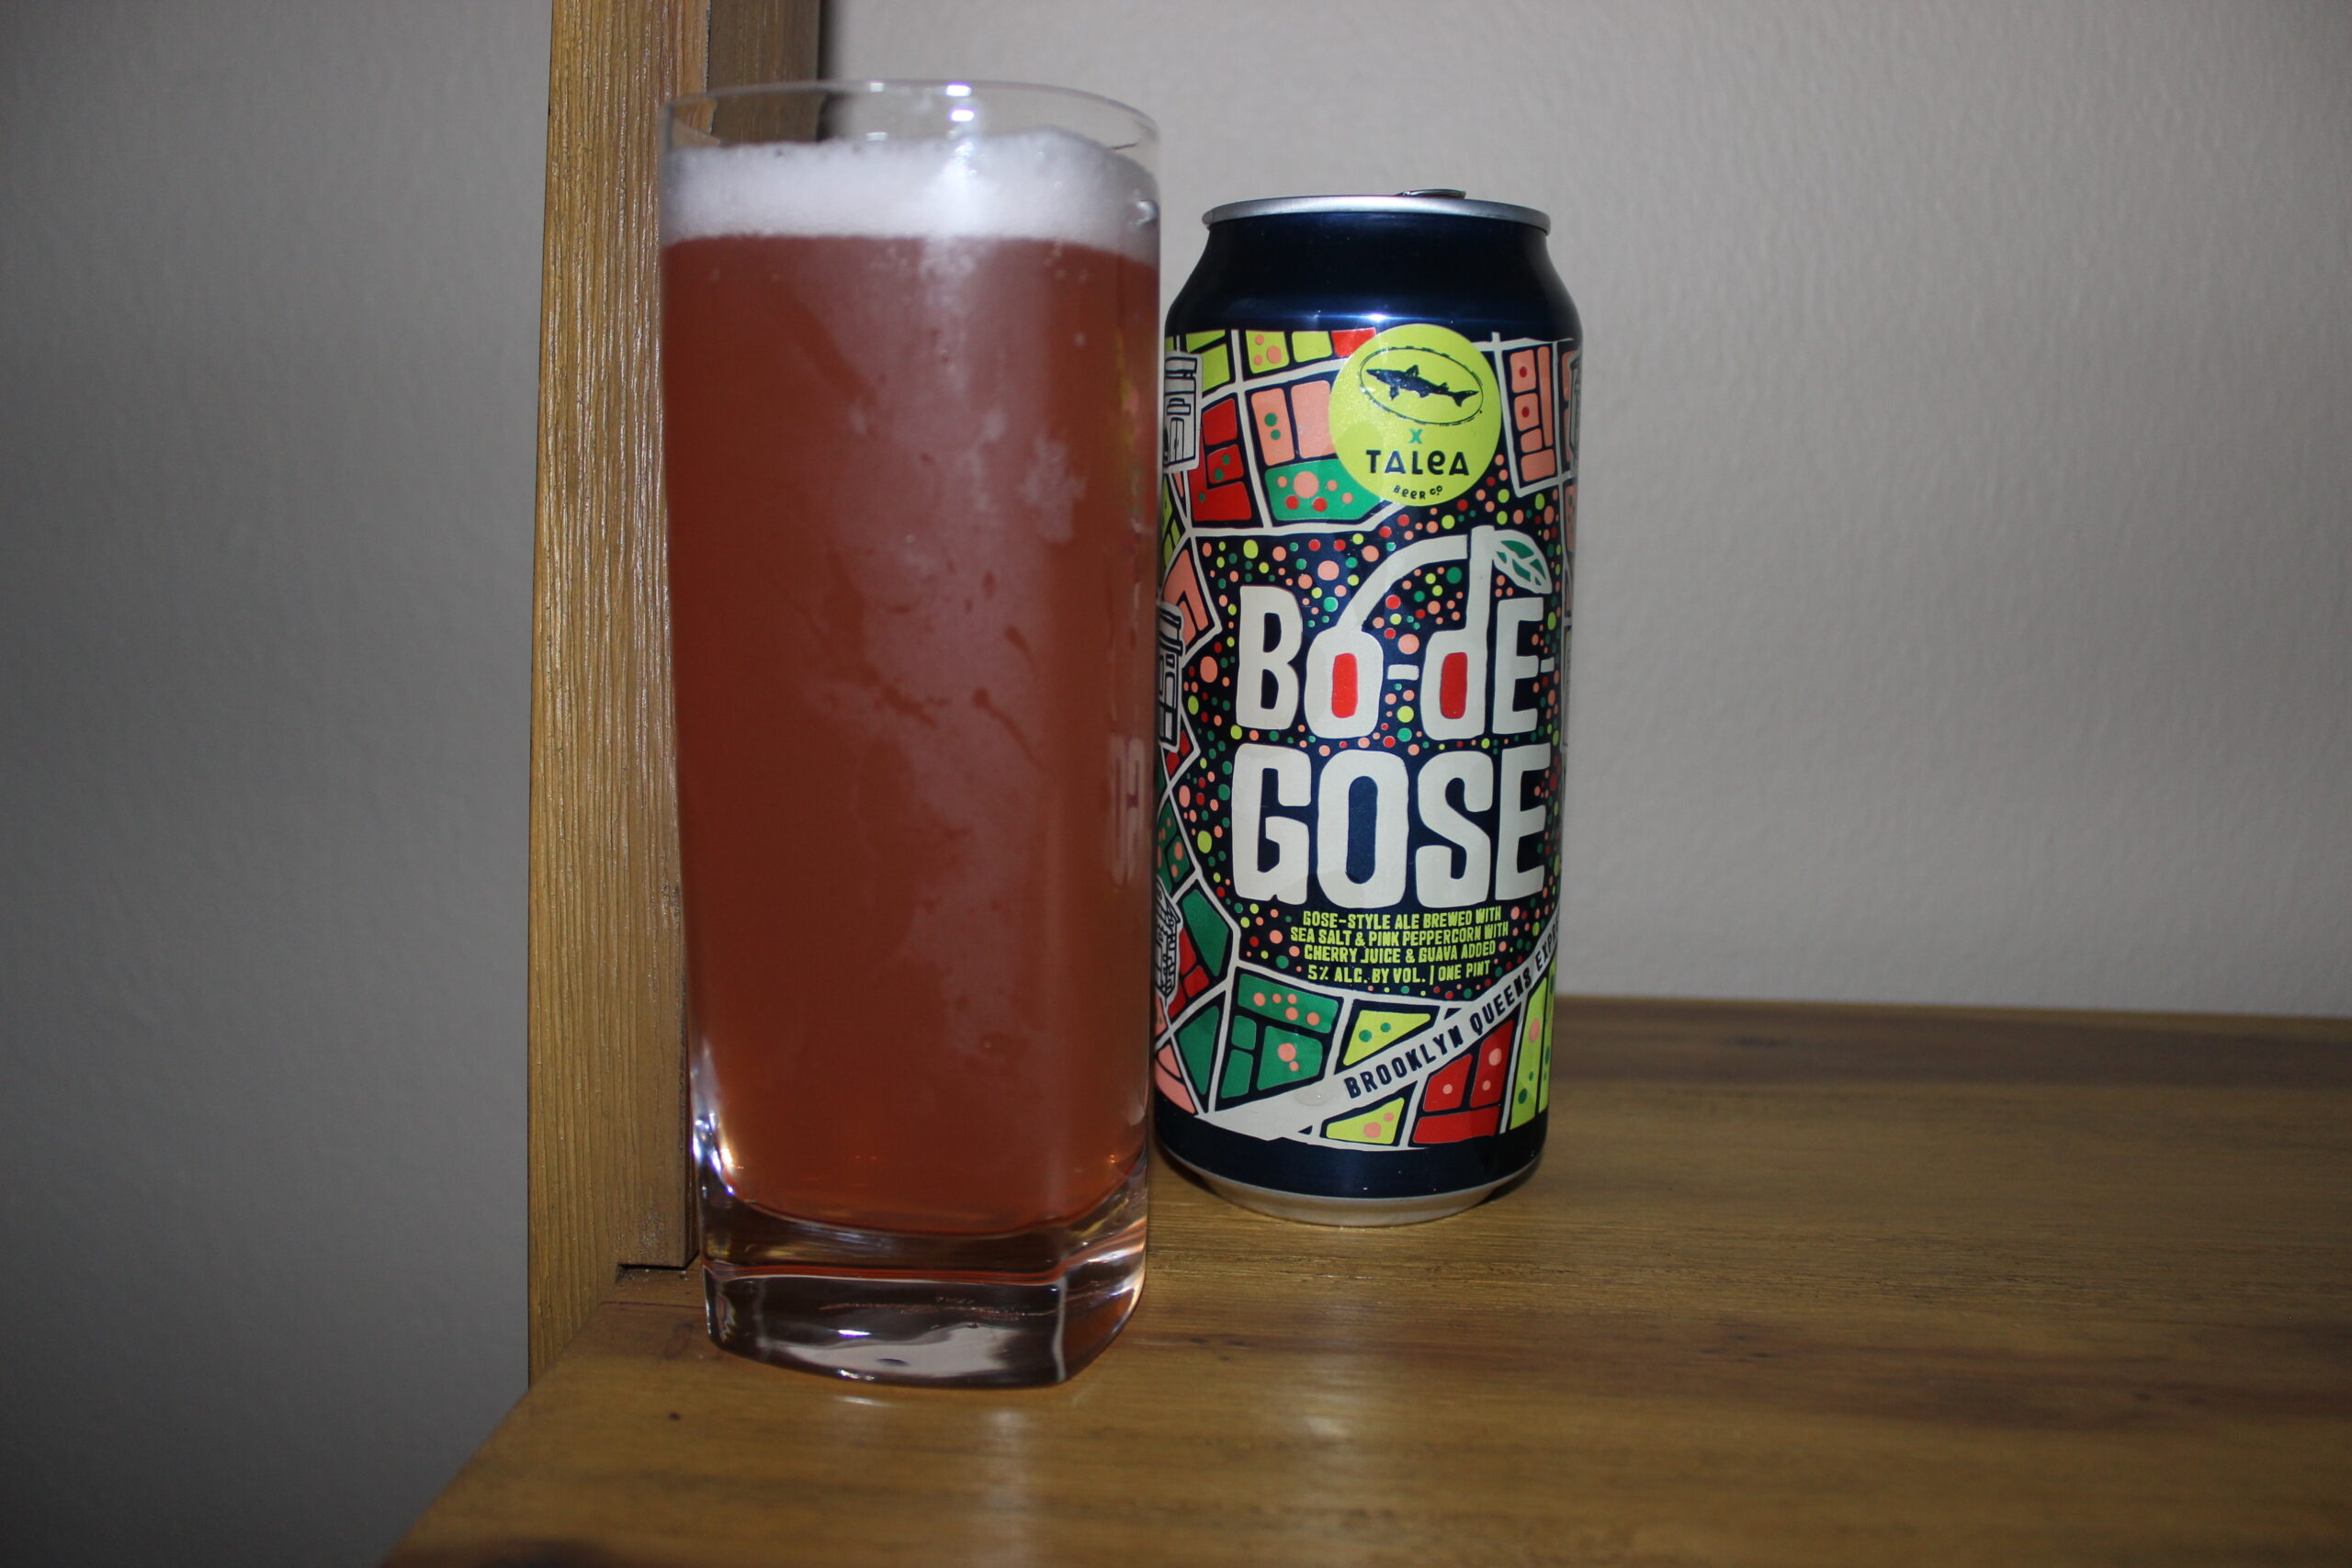 Bo-de-Gose, a limited-edition fruited Gose brewed in collaboration with Dogfish and TALEA Beer Co.